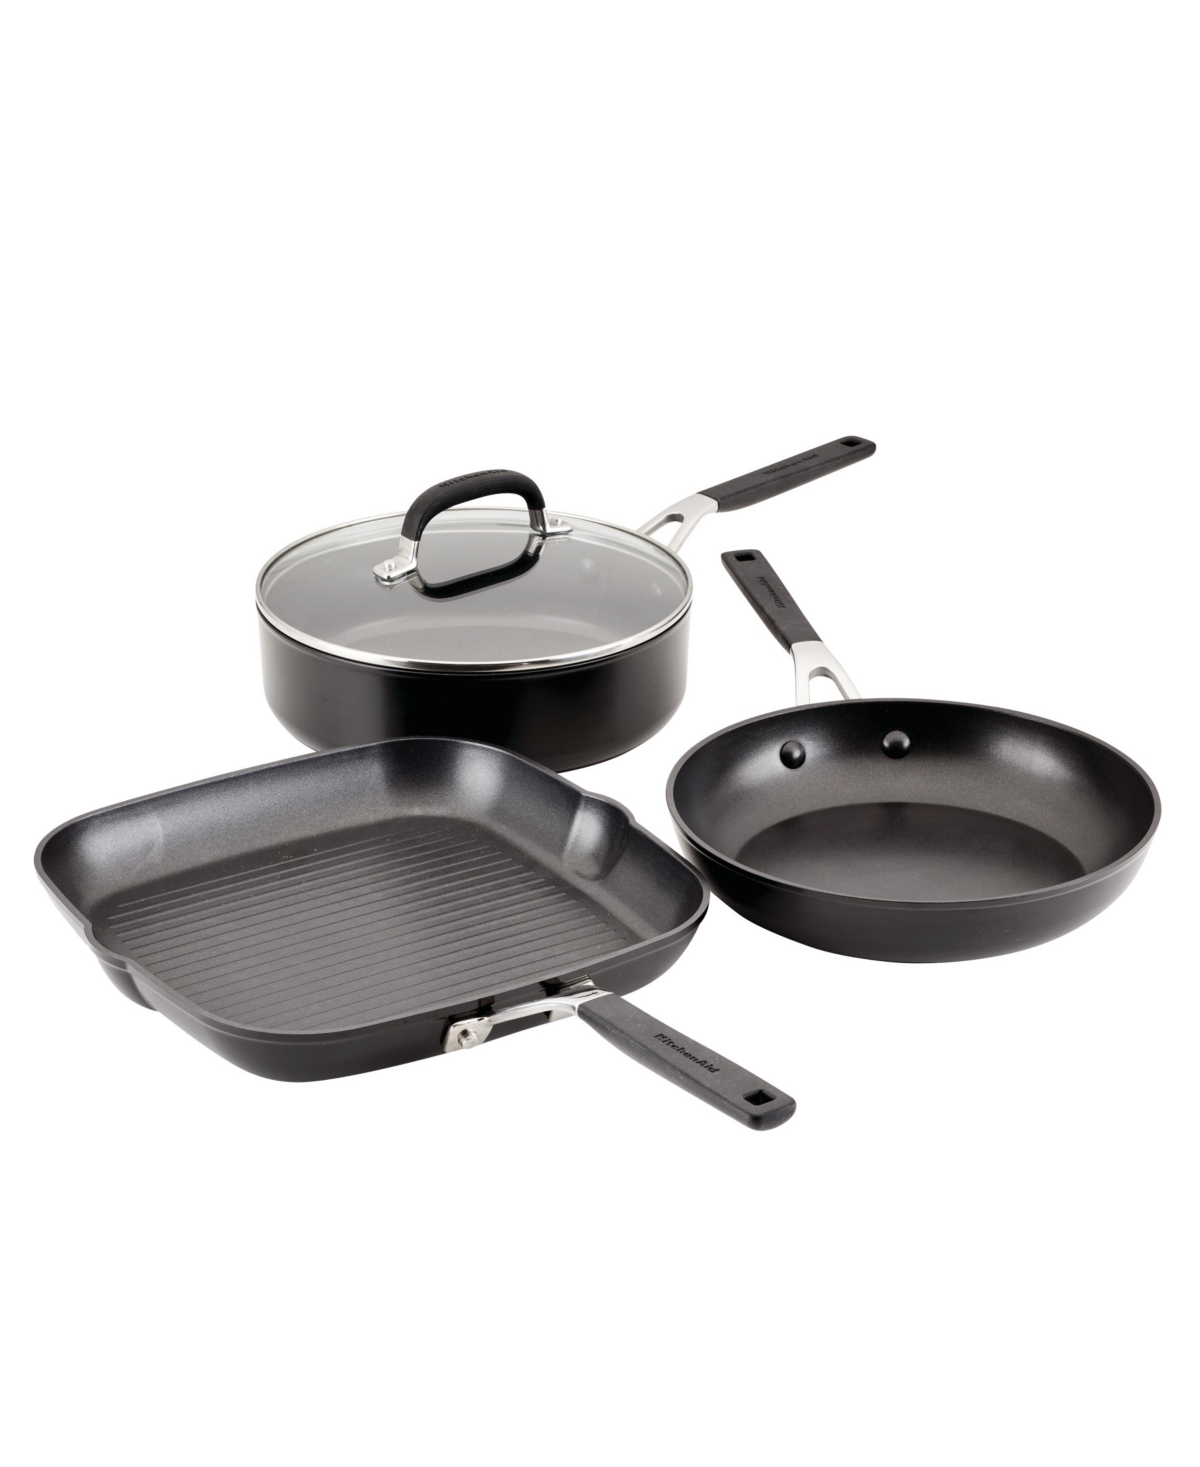 Kitchenaid Hard Anodized Nonstick 4-piece Cookware Pots And Pans Set In Onyx Black